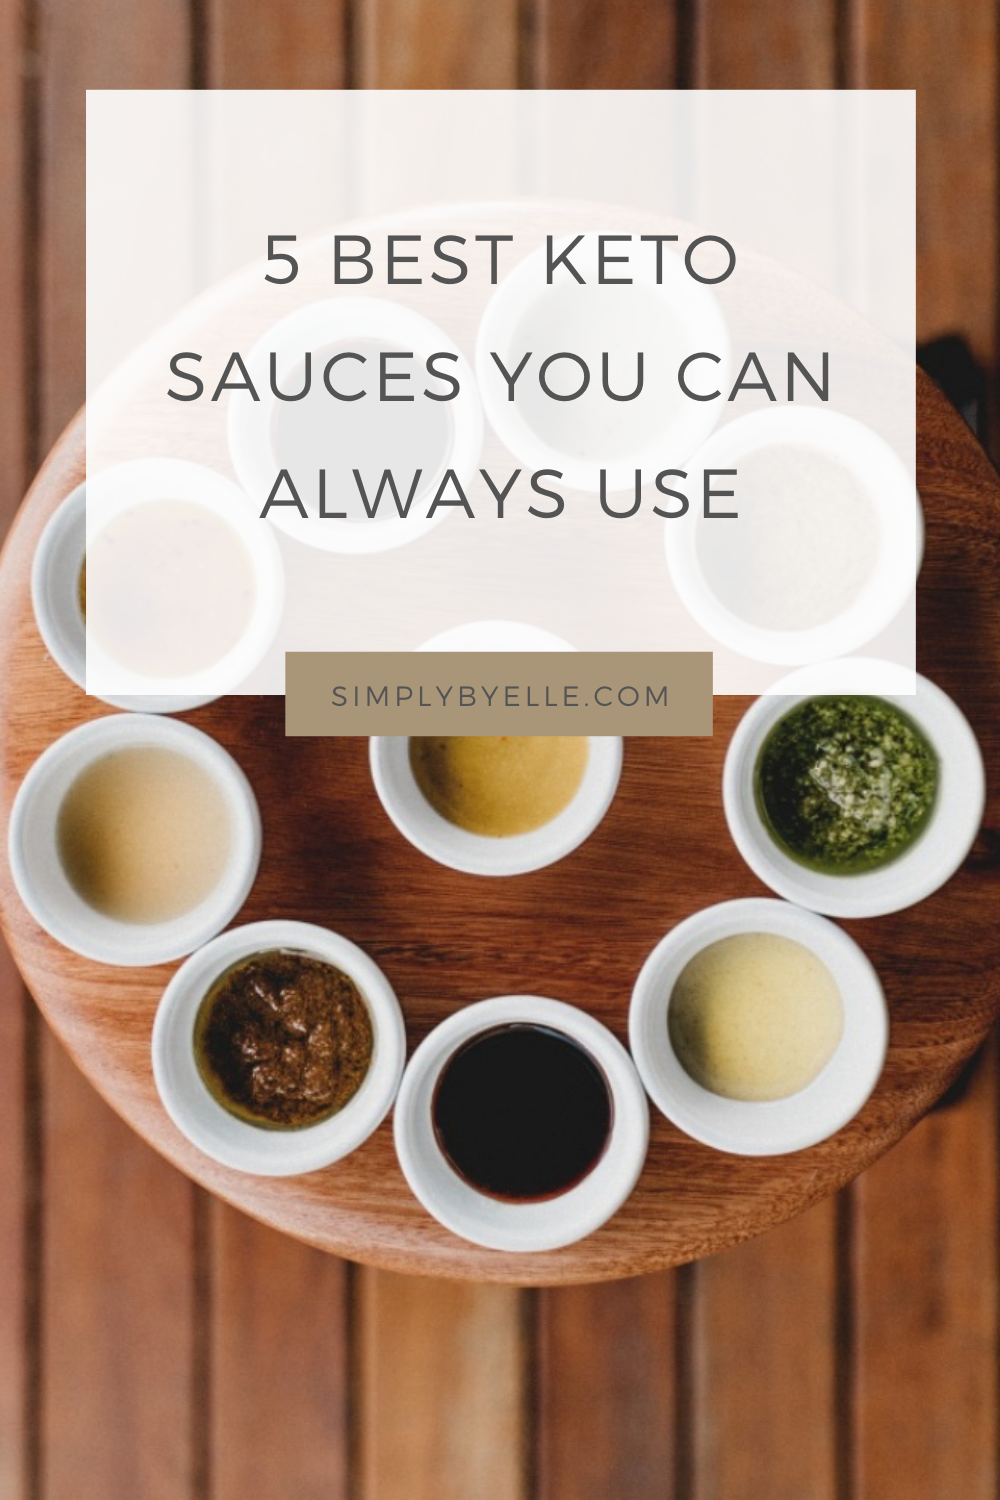 5 best keto sauces you can always use in 2020